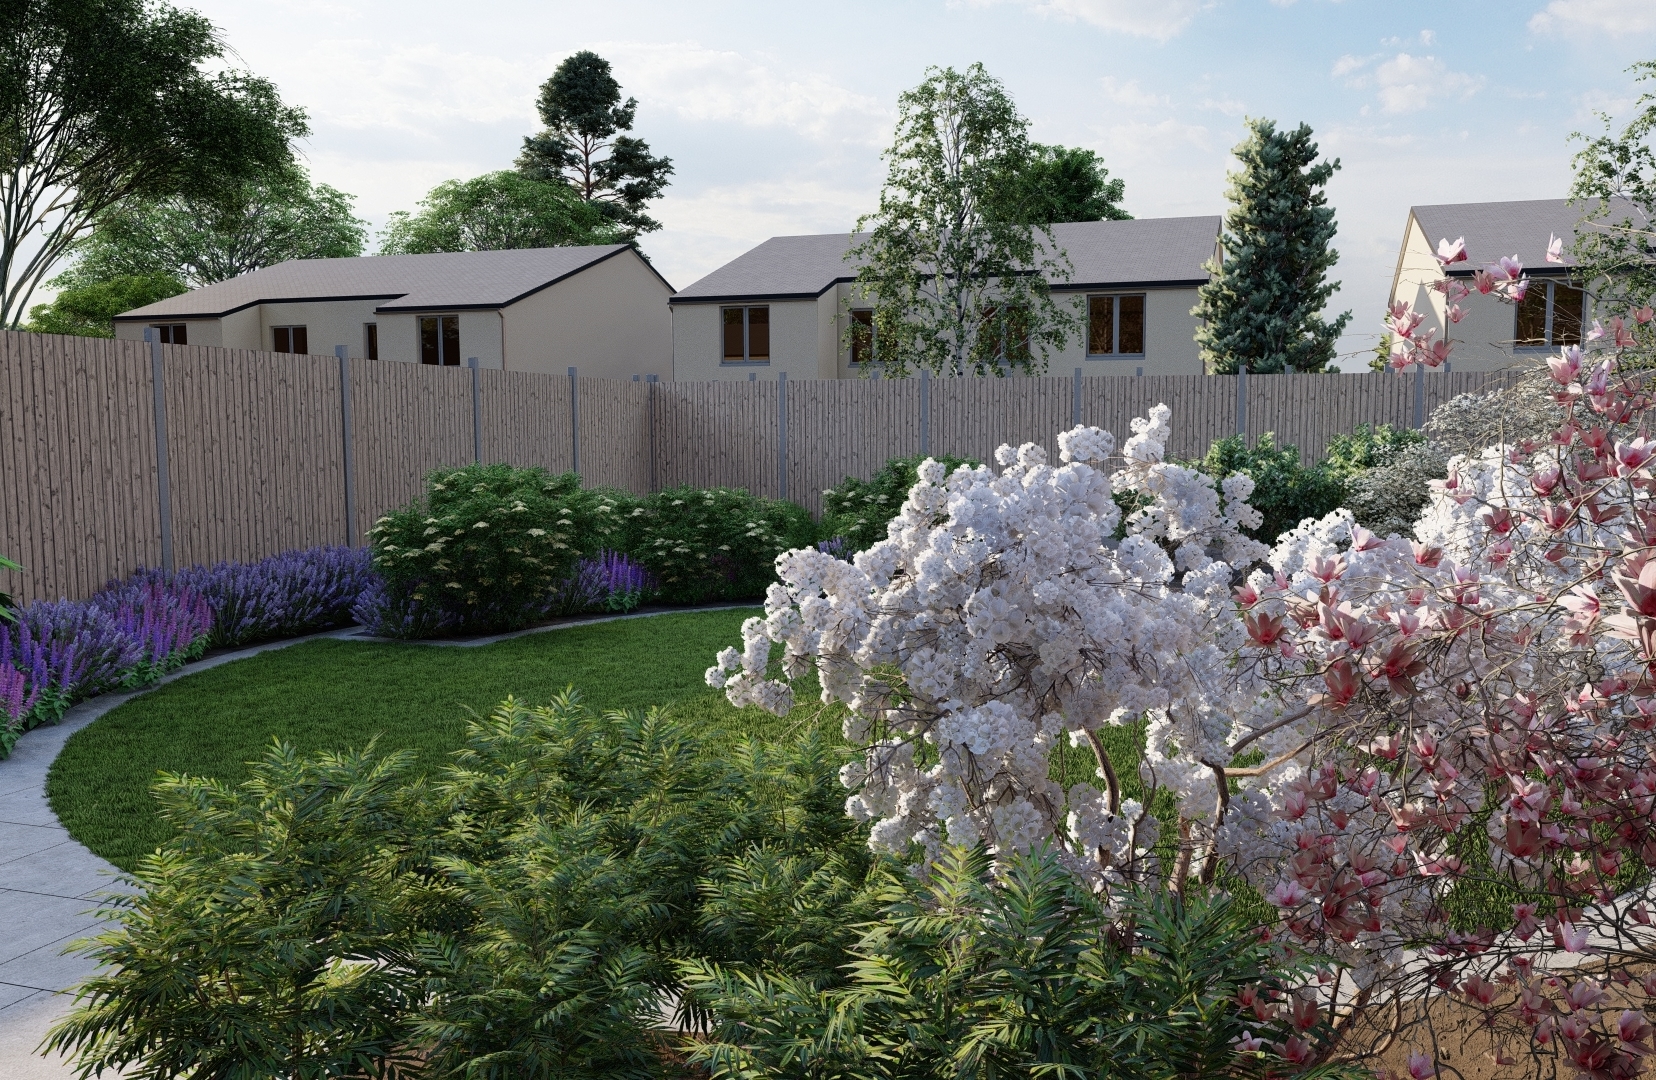 Design Visuals for a large Family Garden in Delgany, Co Wicklow,  featuring several garden elements including Biohort Garden Shed  & Bin Storage, expansive lawn framned by mixed planting borders and a sunken patio area.